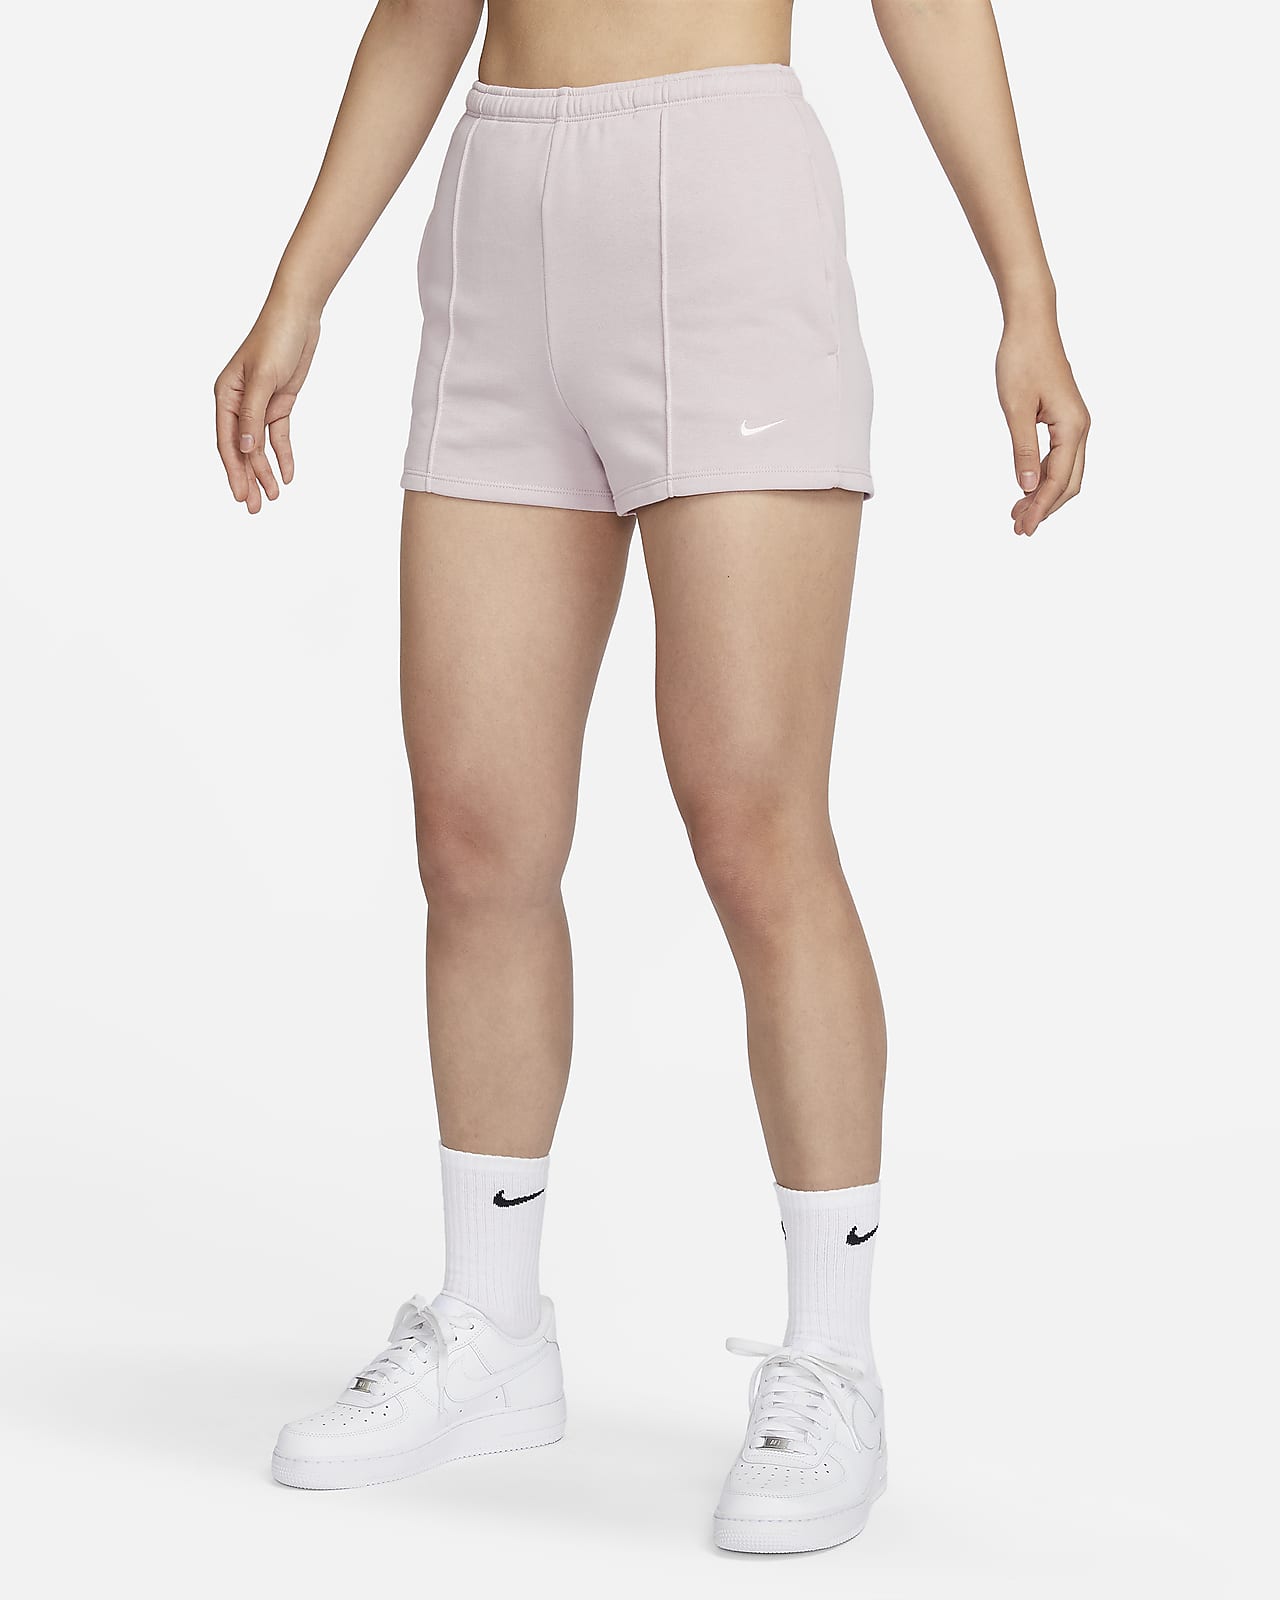 Nike Sportswear Chill Terry Women's Slim High-Waisted French Terry Tracksuit  Bottoms (Plus Size). Nike ID